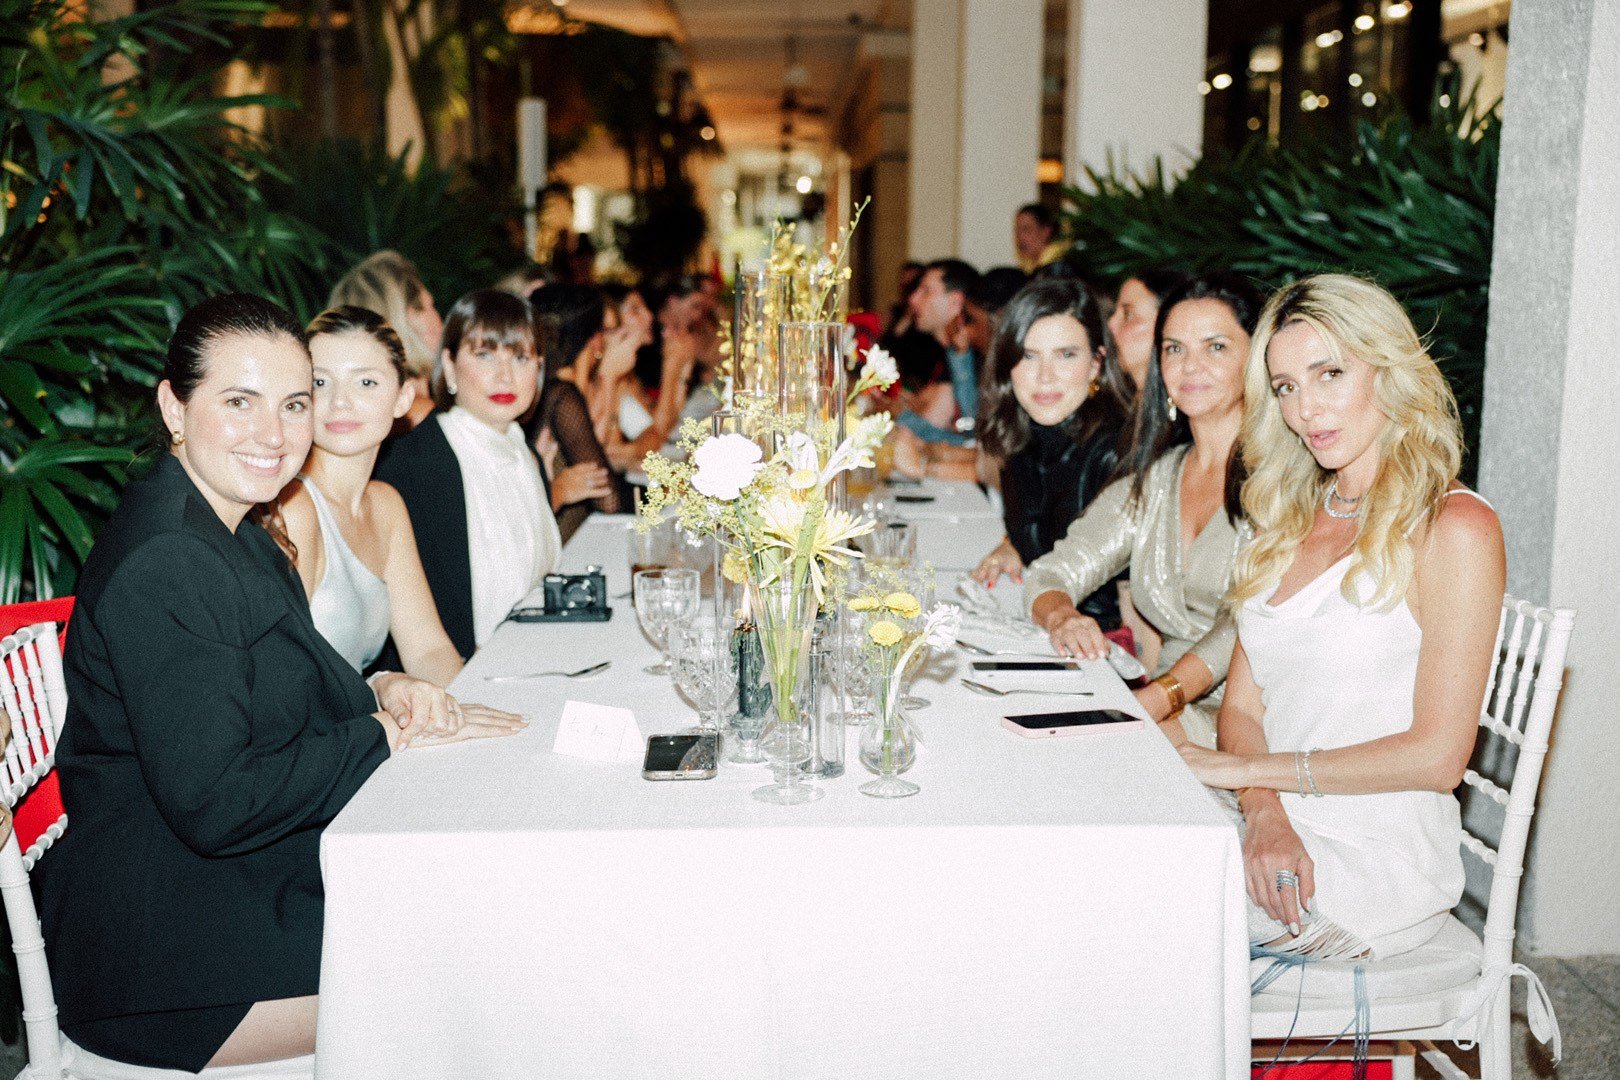 A variety of images showcasing the Bal Harbour Shops x Ferragamo dinner. Images include guests in attendance wearing full Ferragamo looks and enjoying dinner